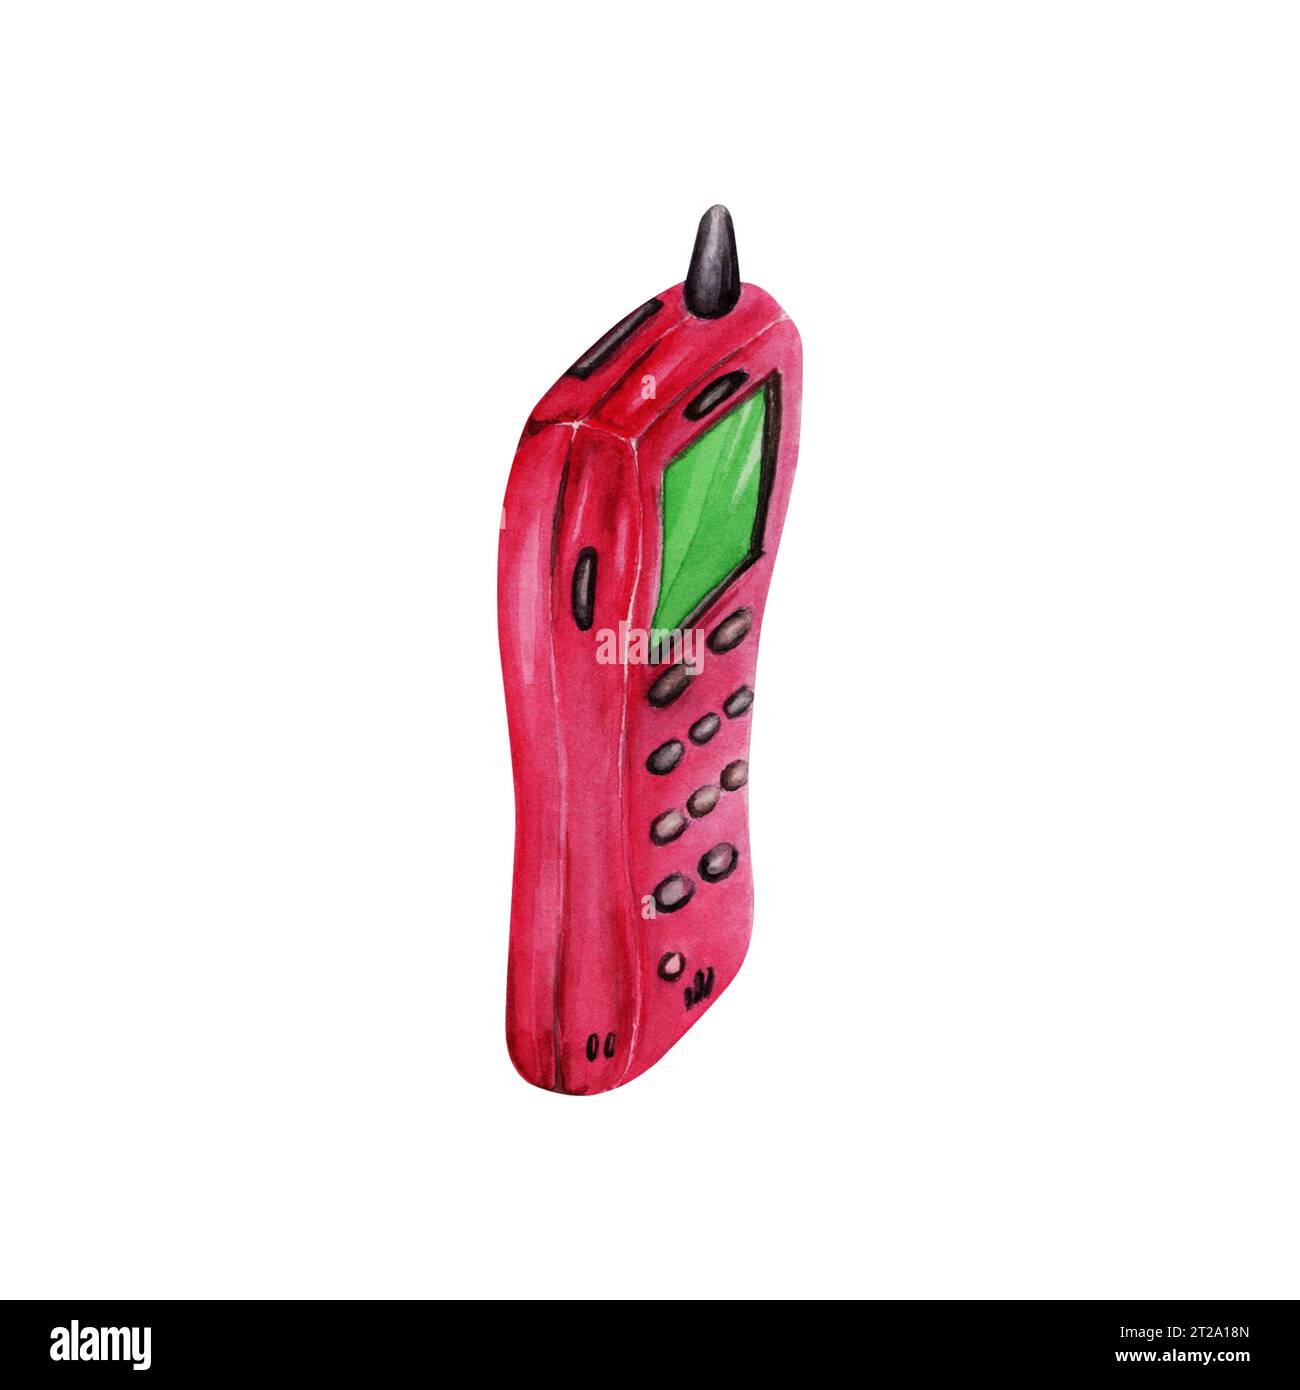 Side view of a pink 1990s mobile phone with antenna. Hand drawn watercolor illustration isolated on white background. Funky cellphone from 90s era. Stock Photo